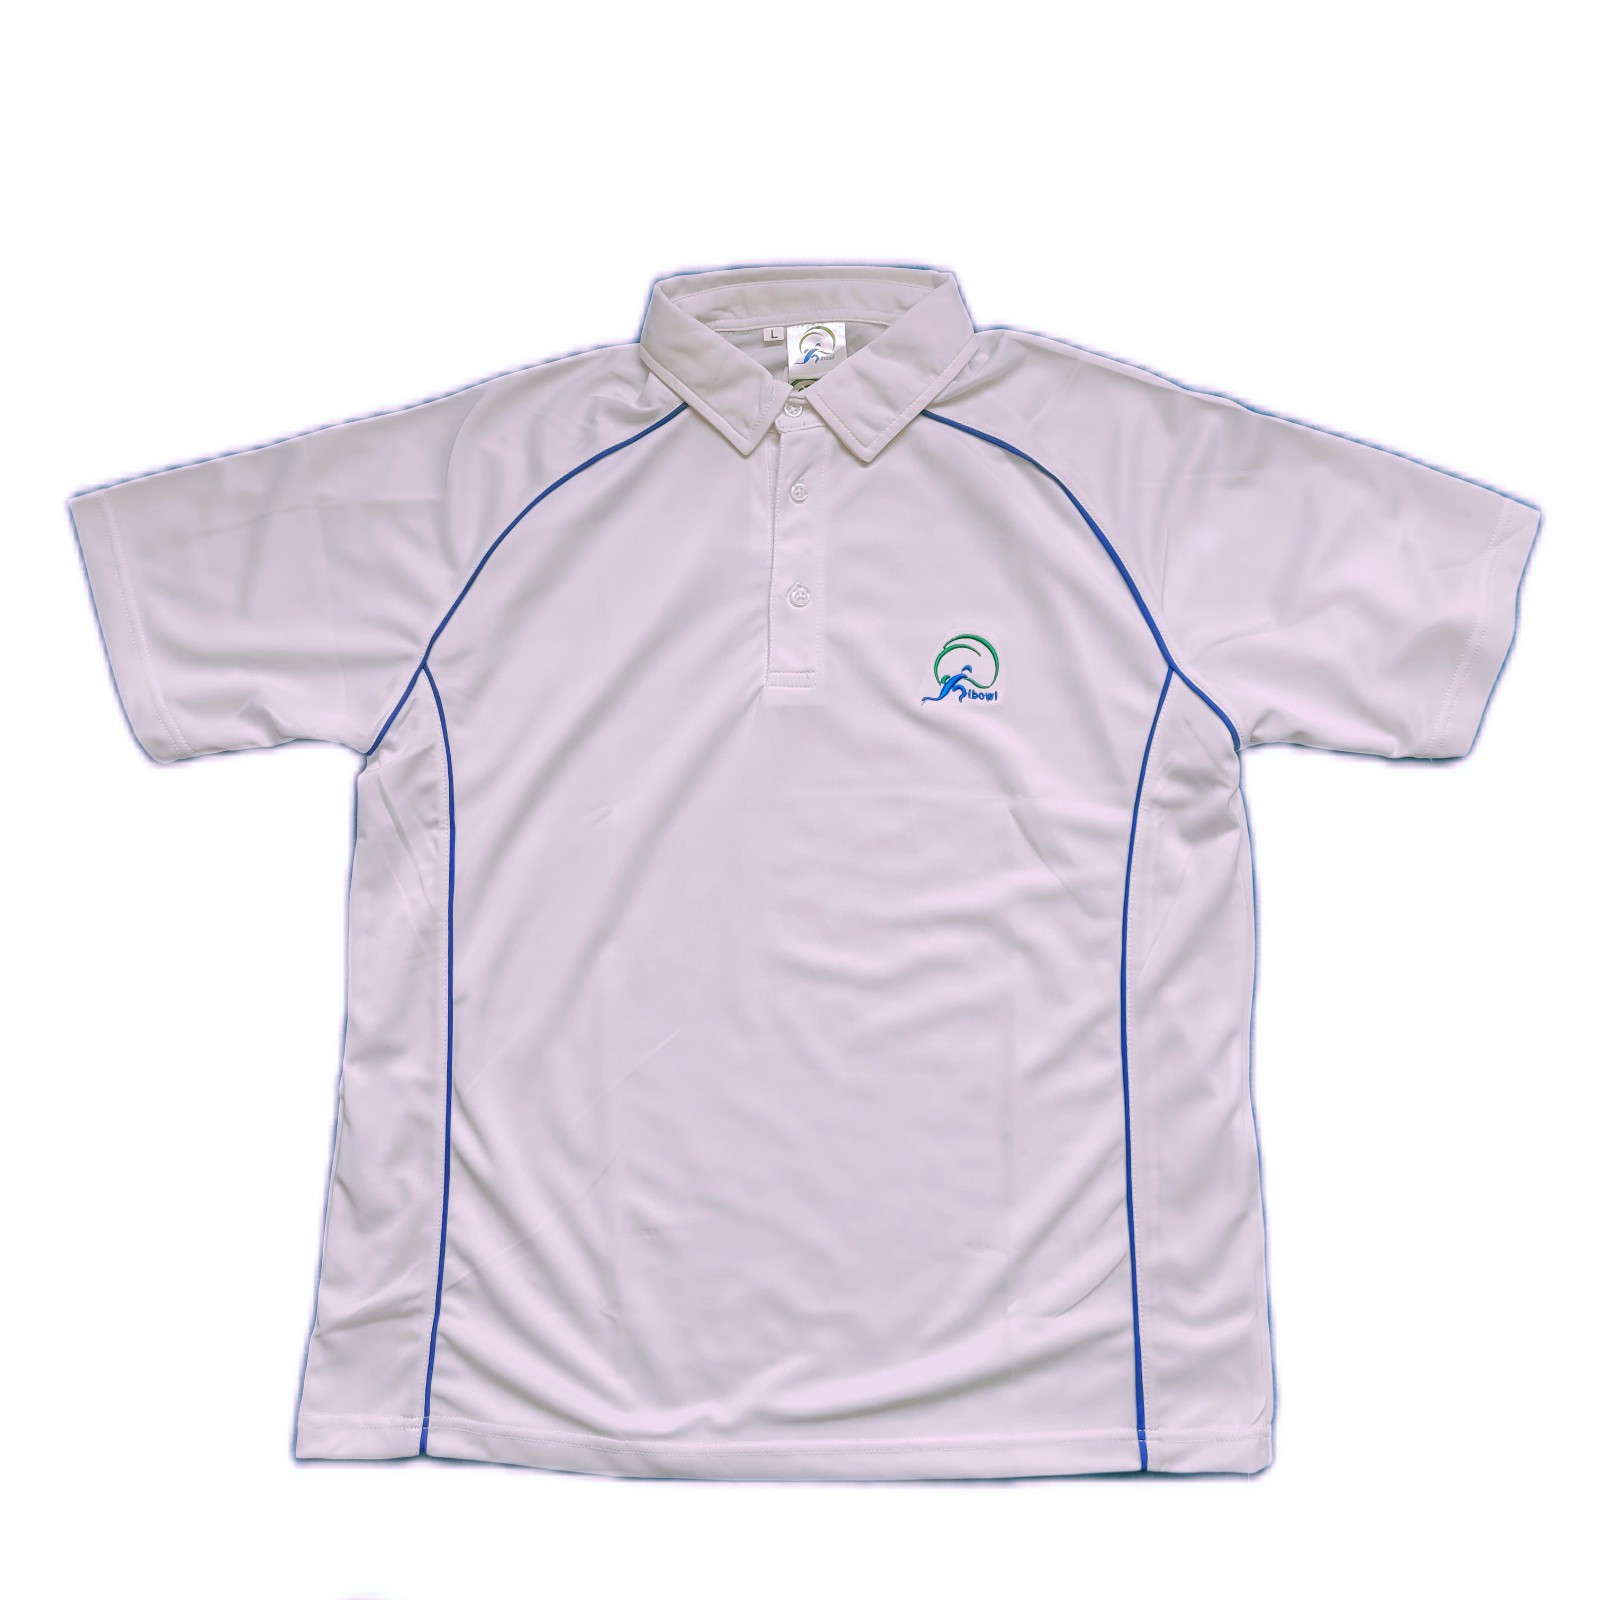 ibowl Polo Shirt White with Royal Blue Piping